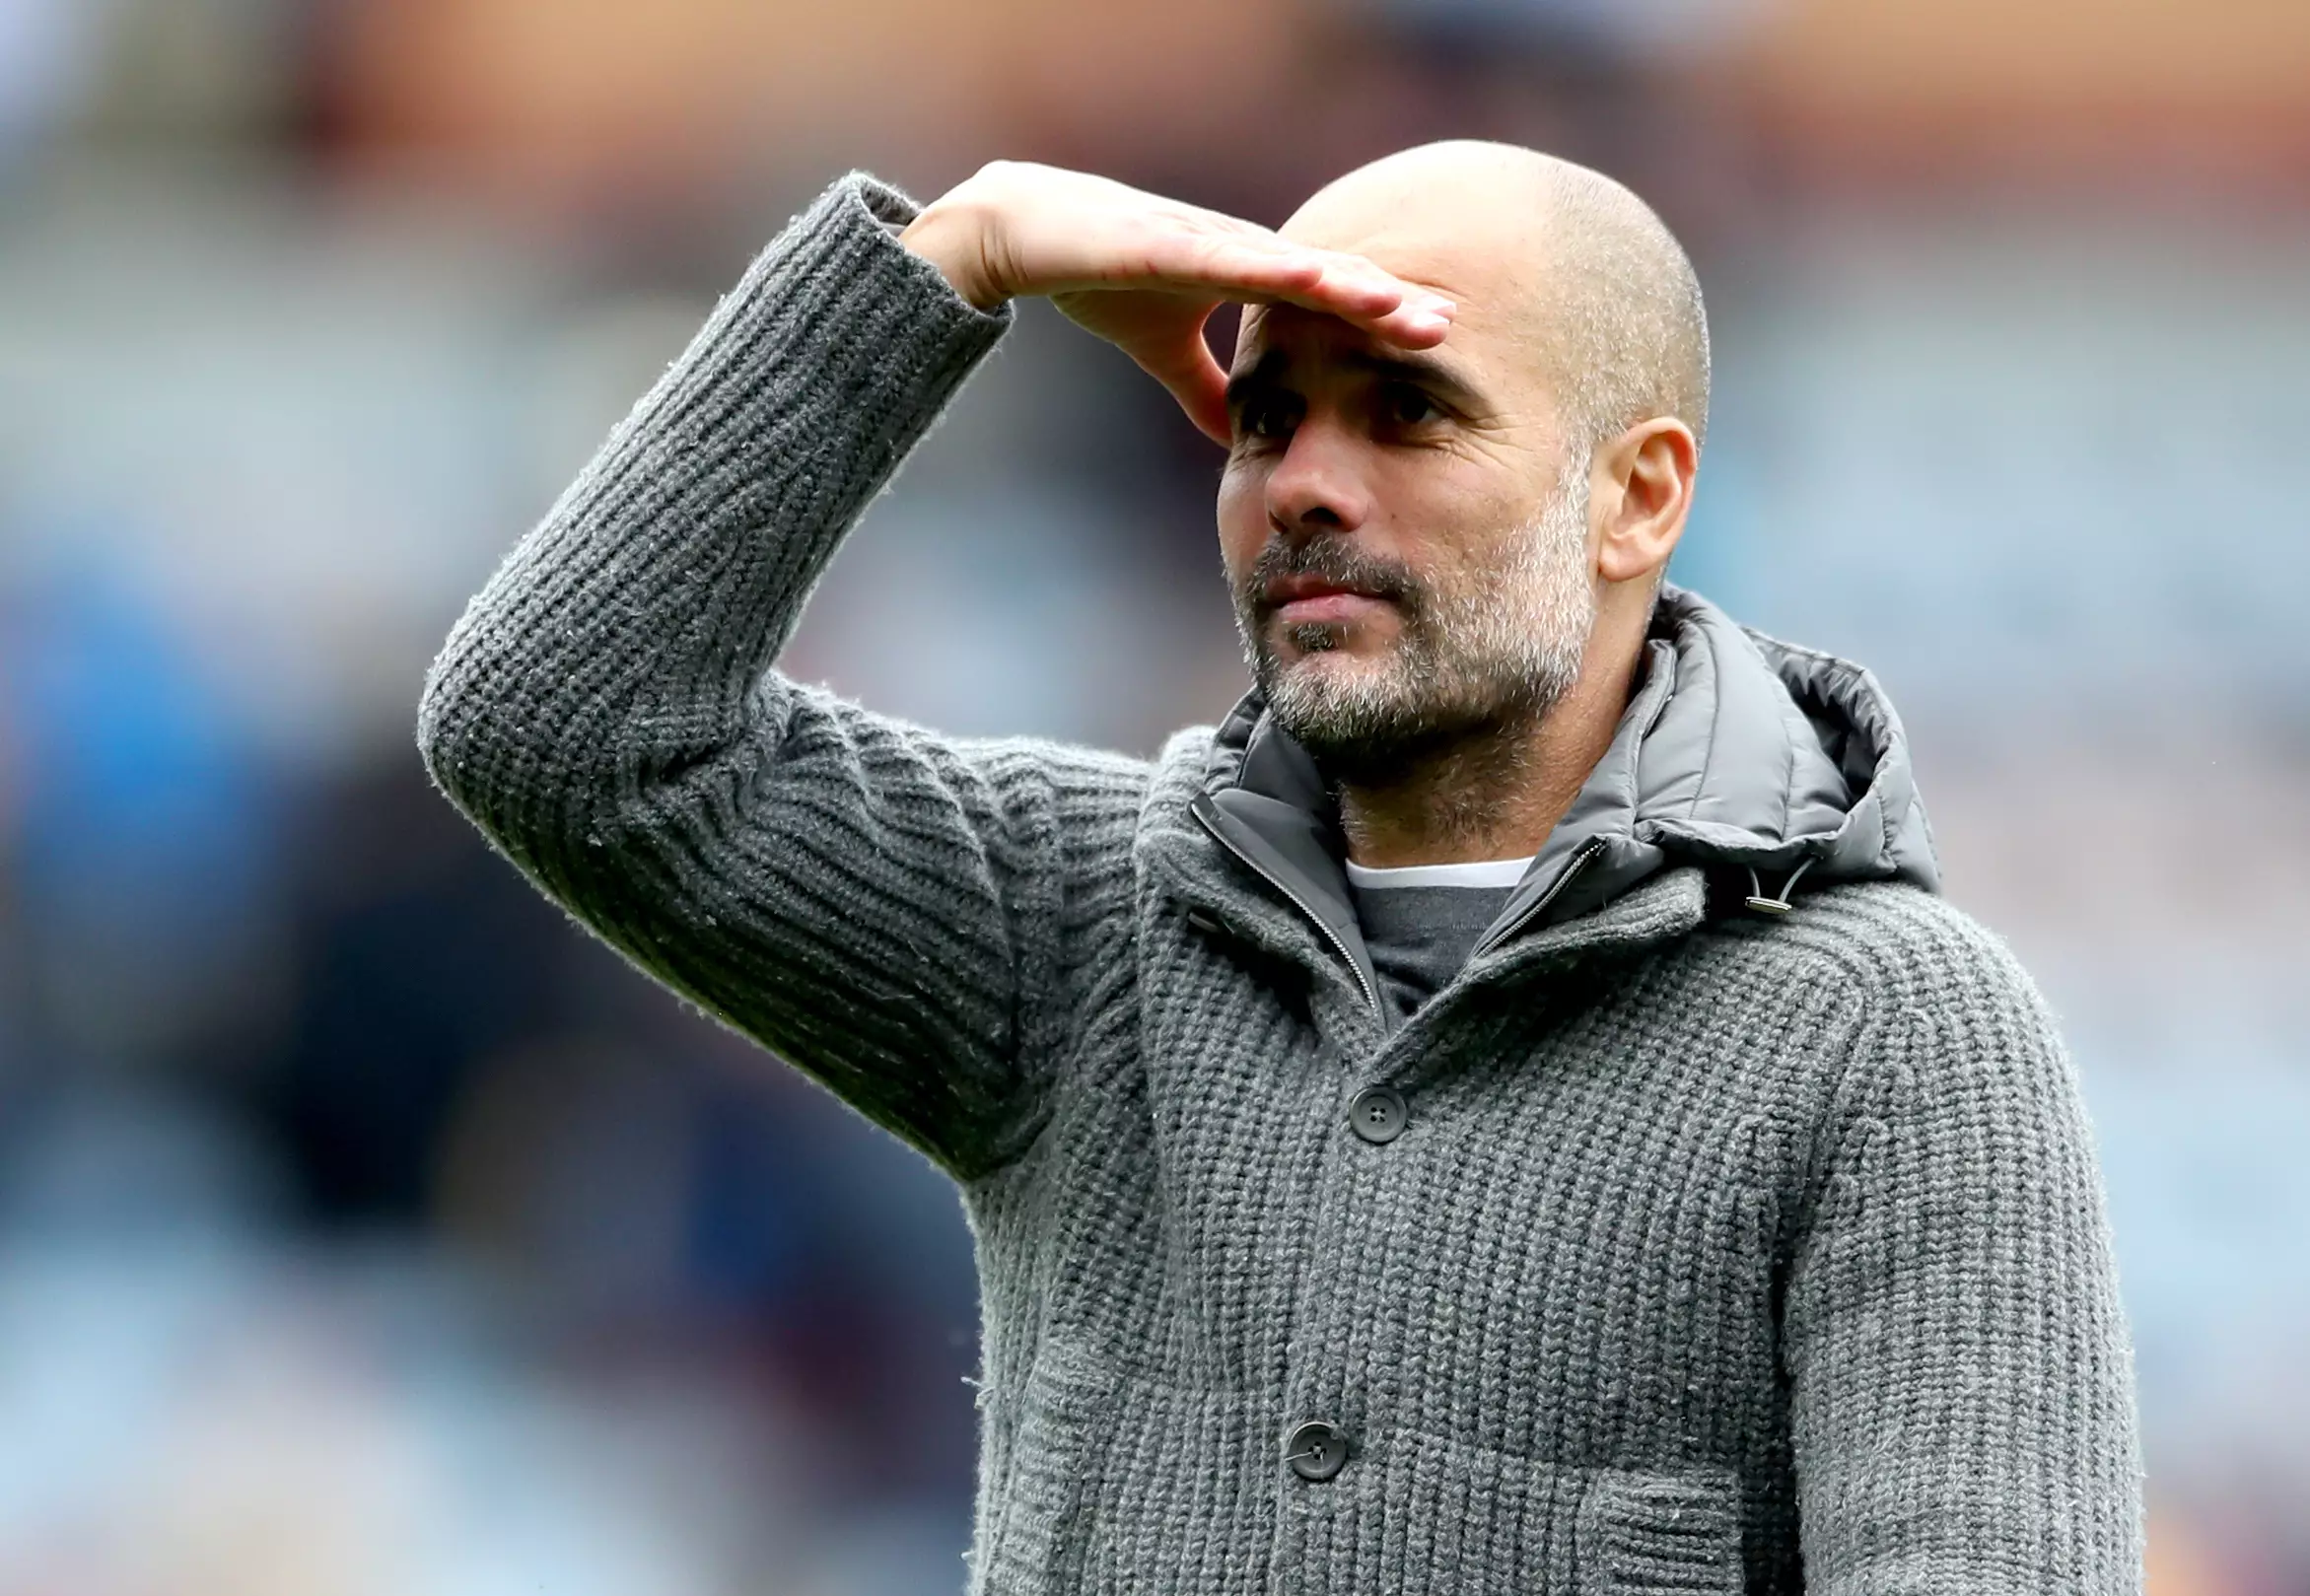 Guardiola looking for ways to make his team even better. Image: PA Images